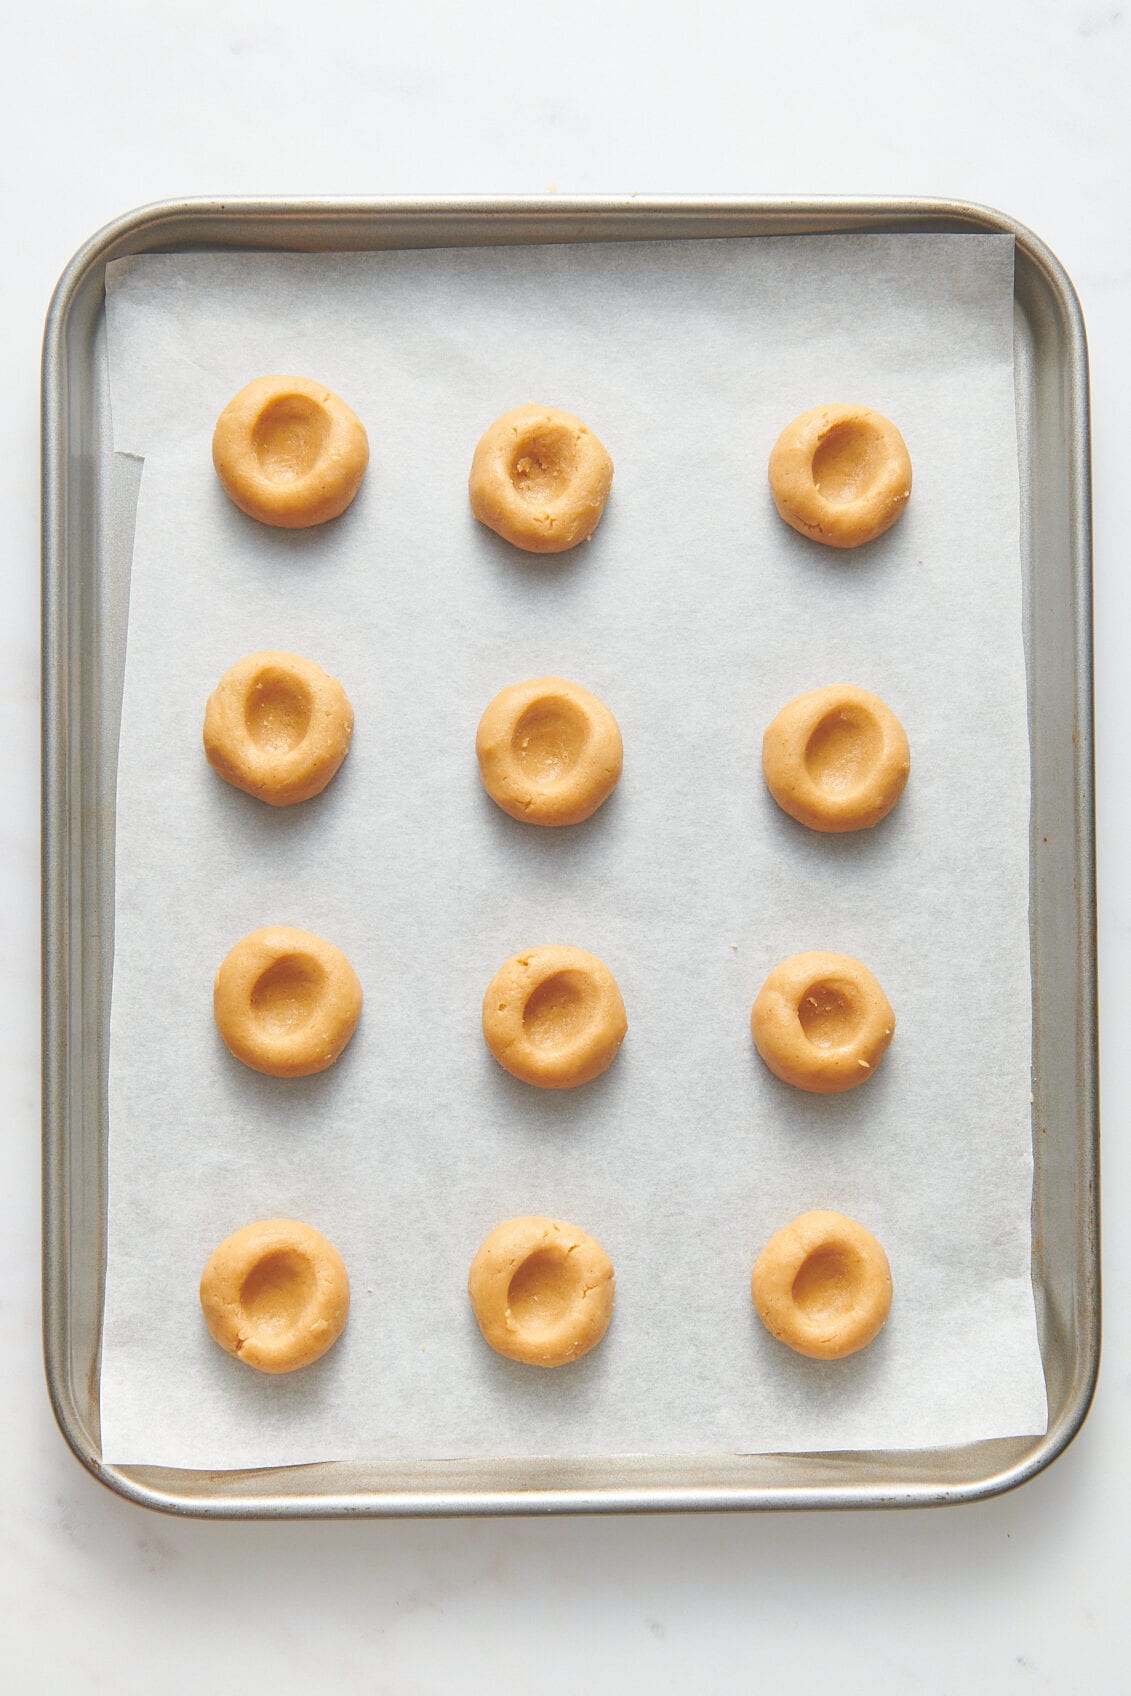 peanut butter thumbprint cookies prepped on a parchment-lined baking tray. 